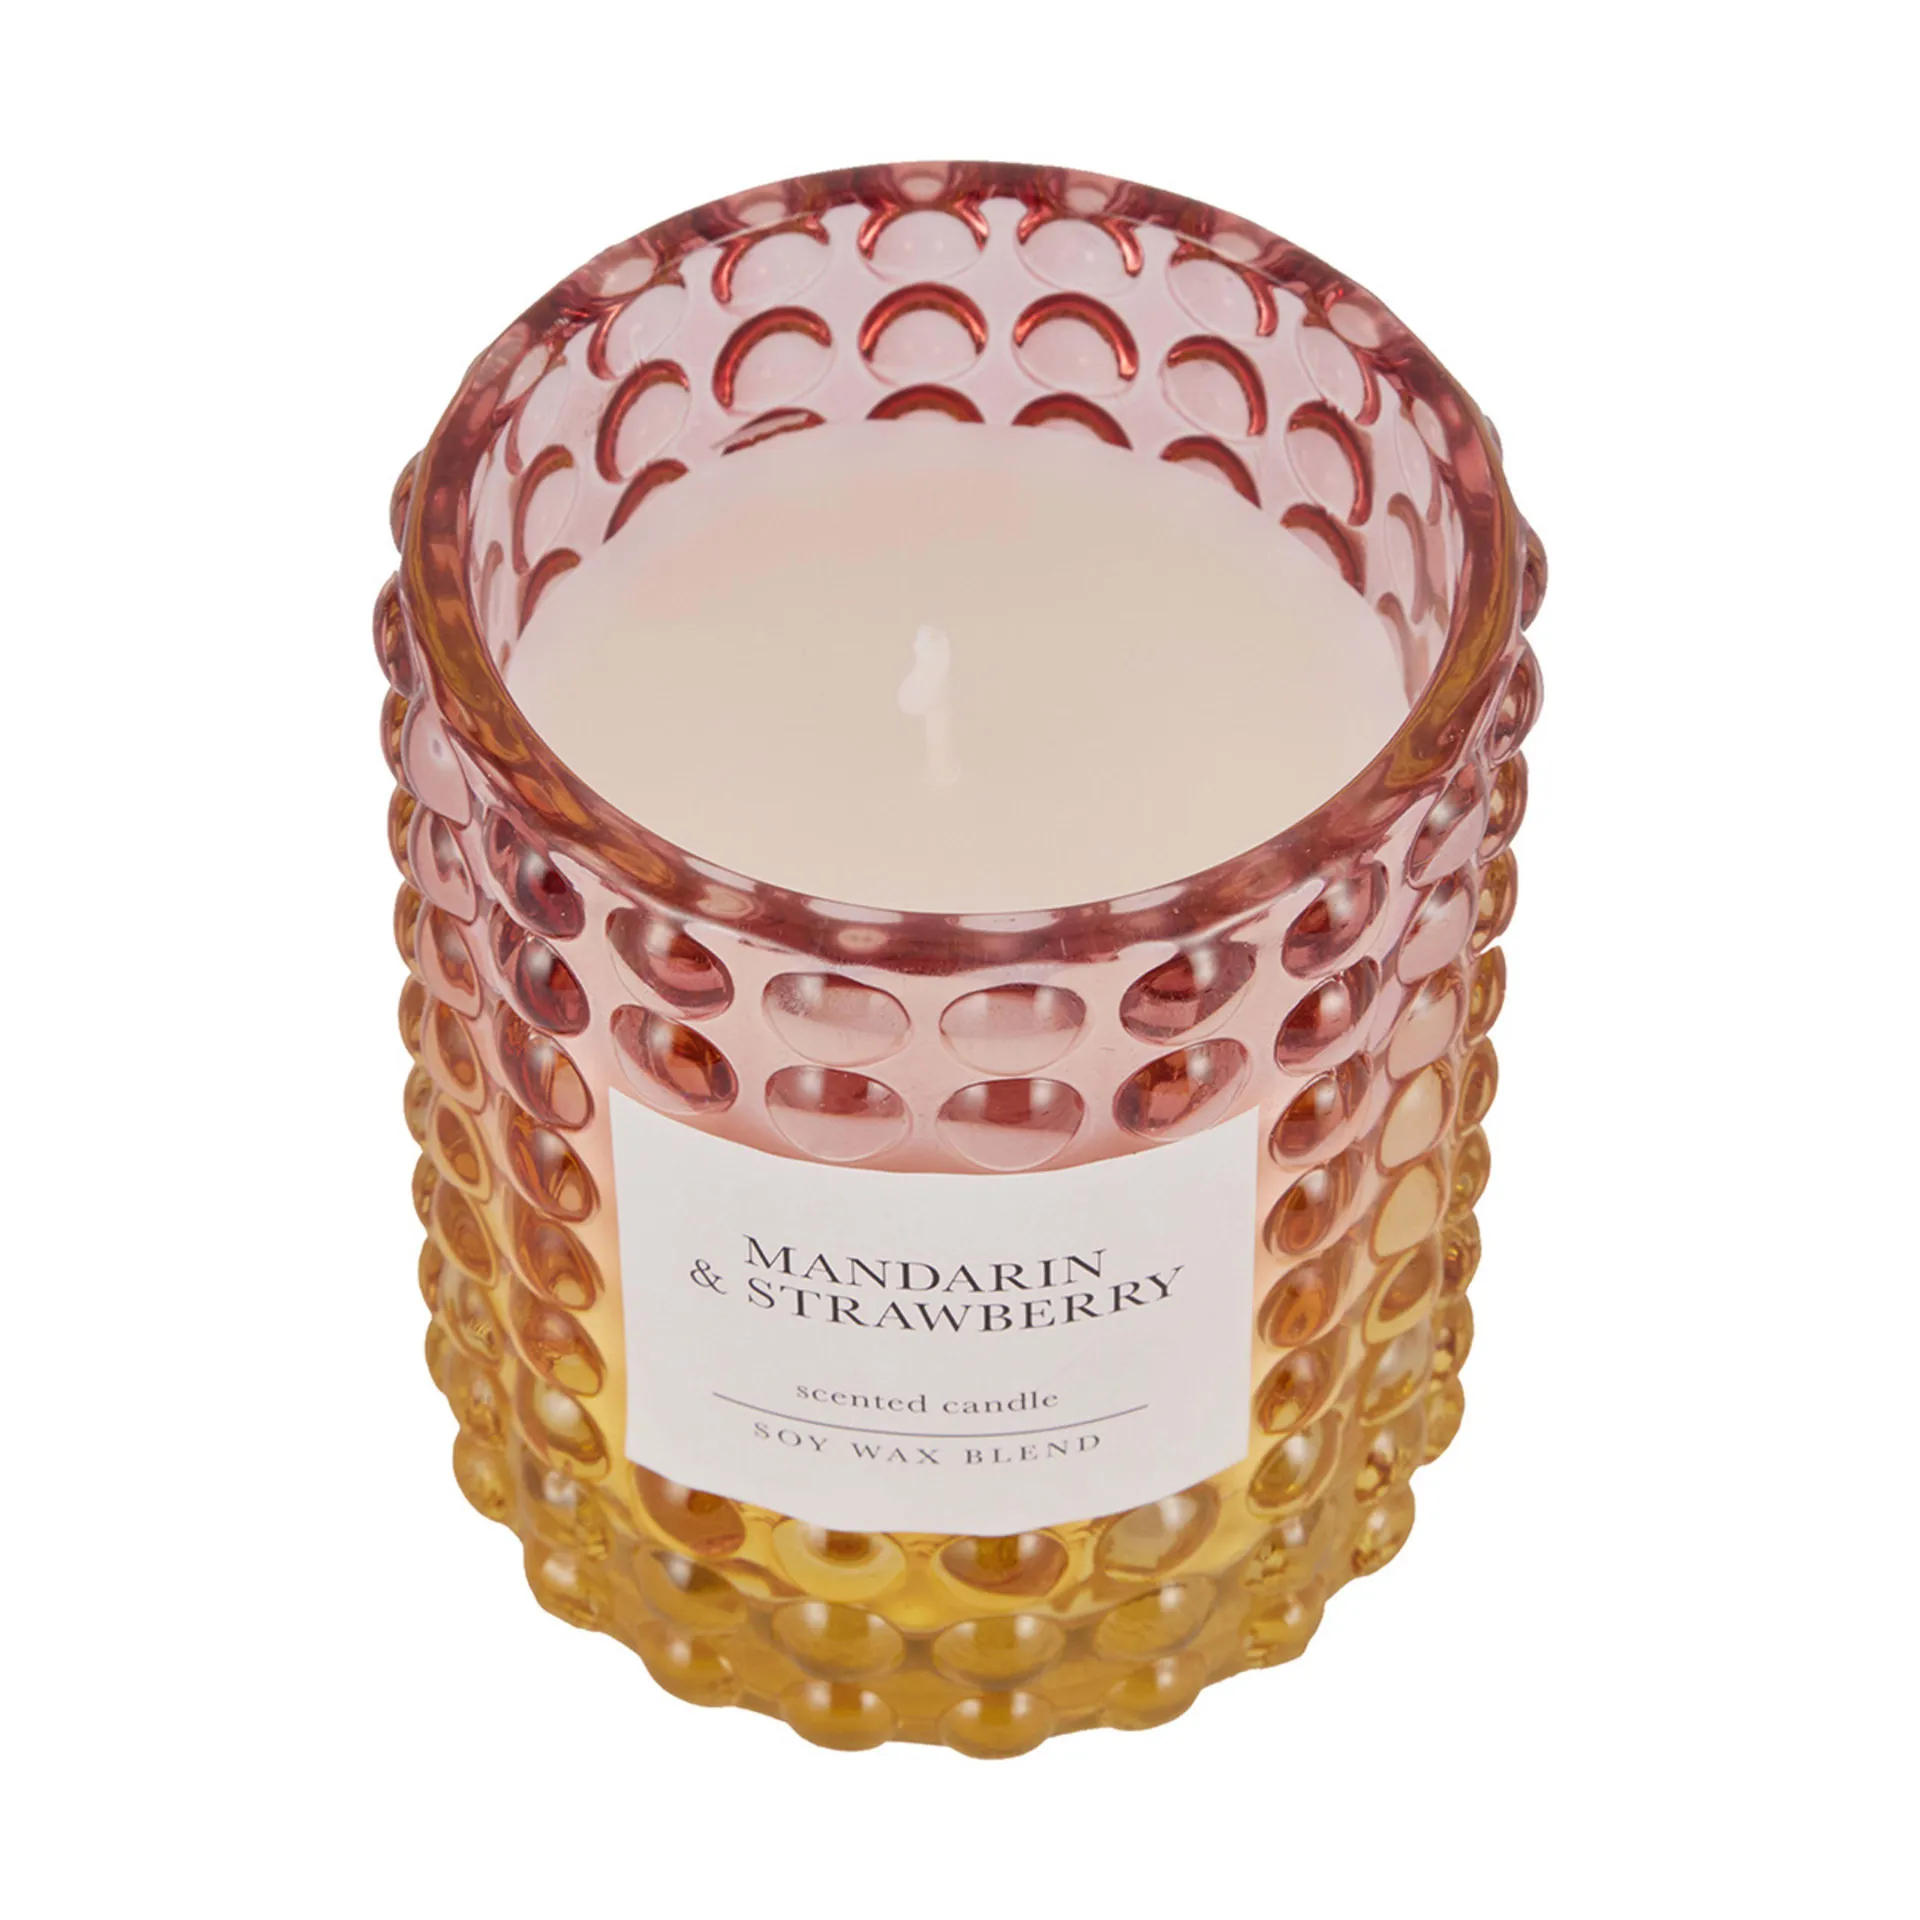 Mandarin and Strawberry Prosecco Fizz Ombre Soy Wax Blend Scented Candle